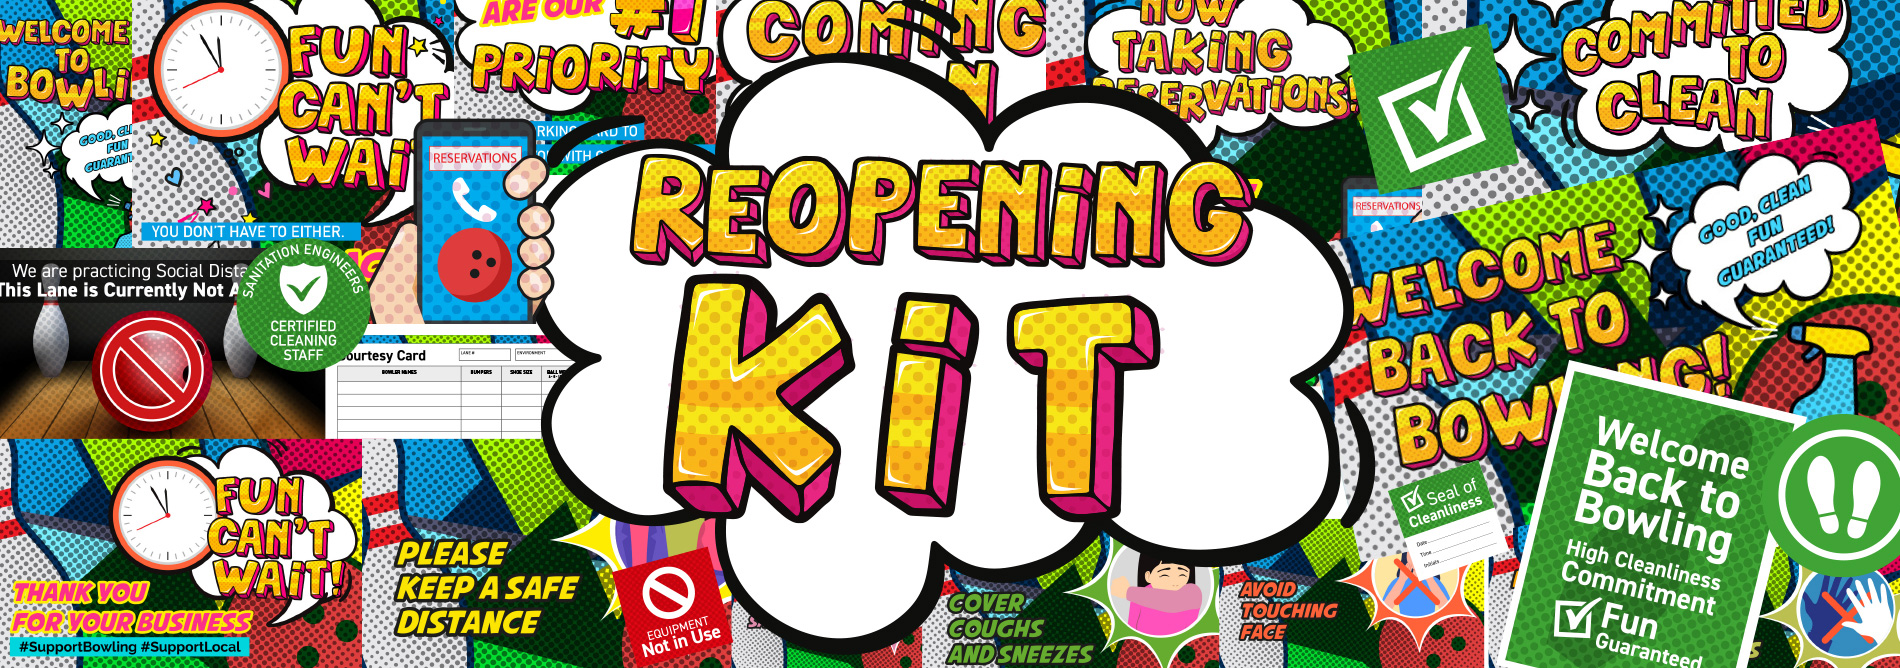 Bowling-QubicaAMF-reopening-kit-banner.jpg